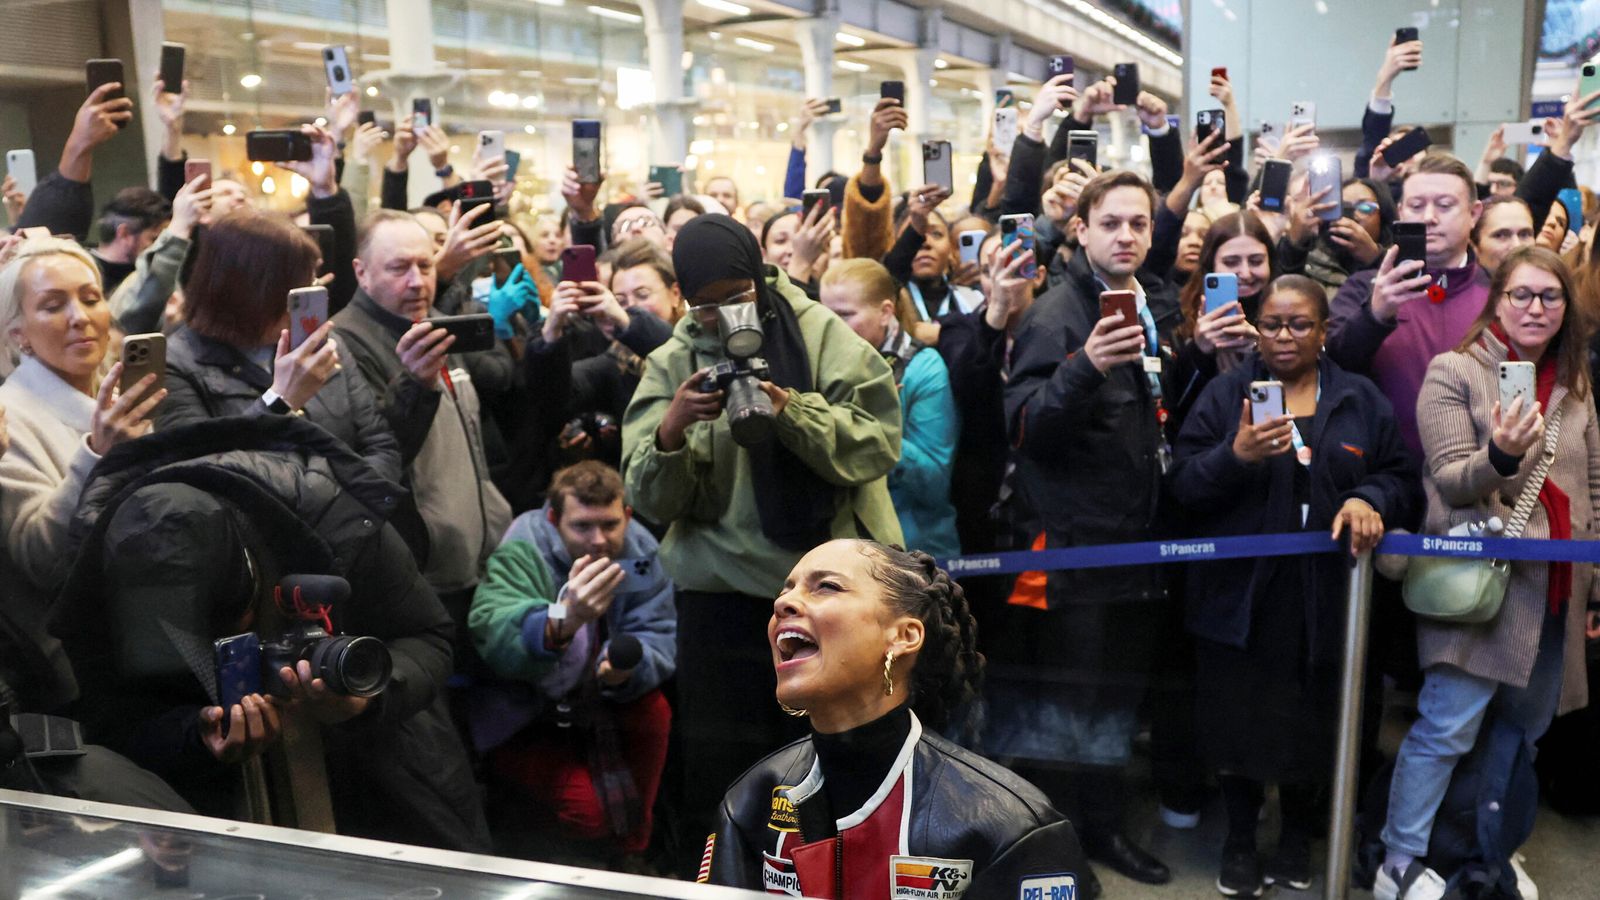 Alicia Keys plays surprise set on piano at St Pancras station in London